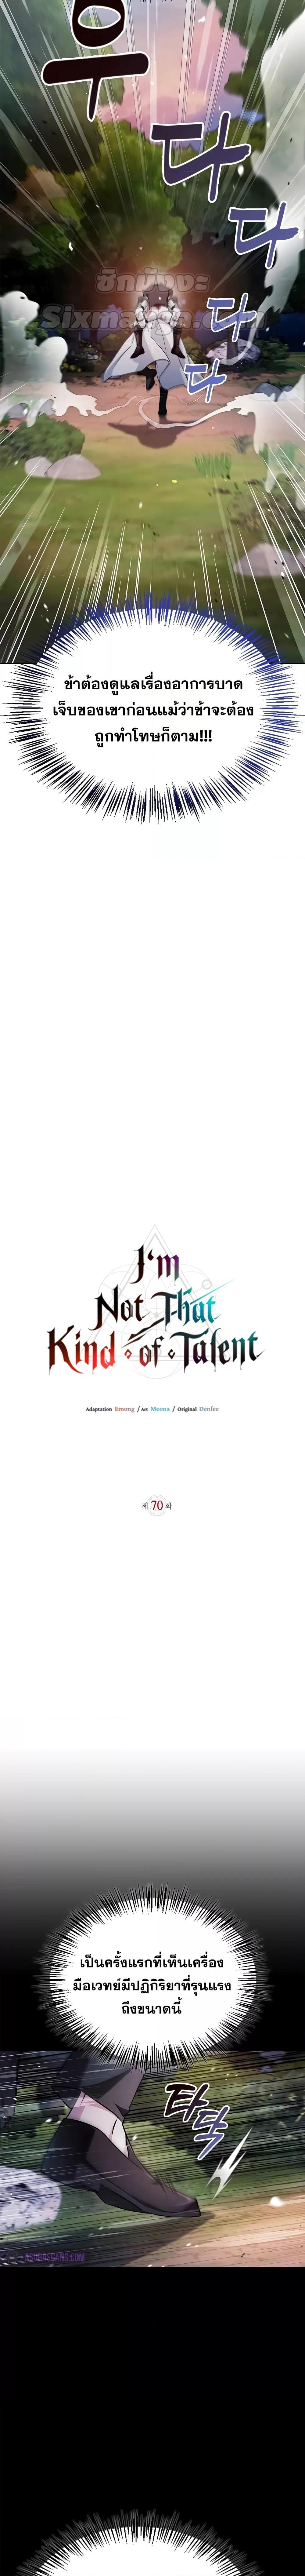 I’m Not That Kind of Talent 70 08